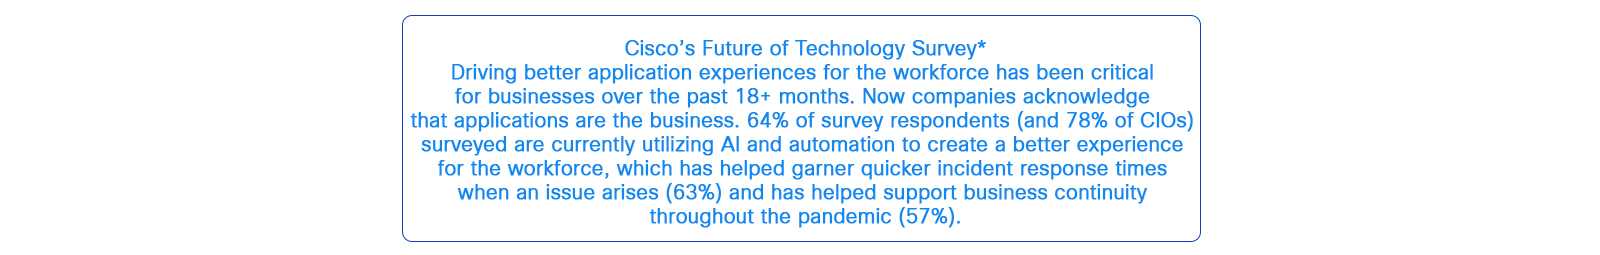 Quote from Cisco Future of Technology Survey